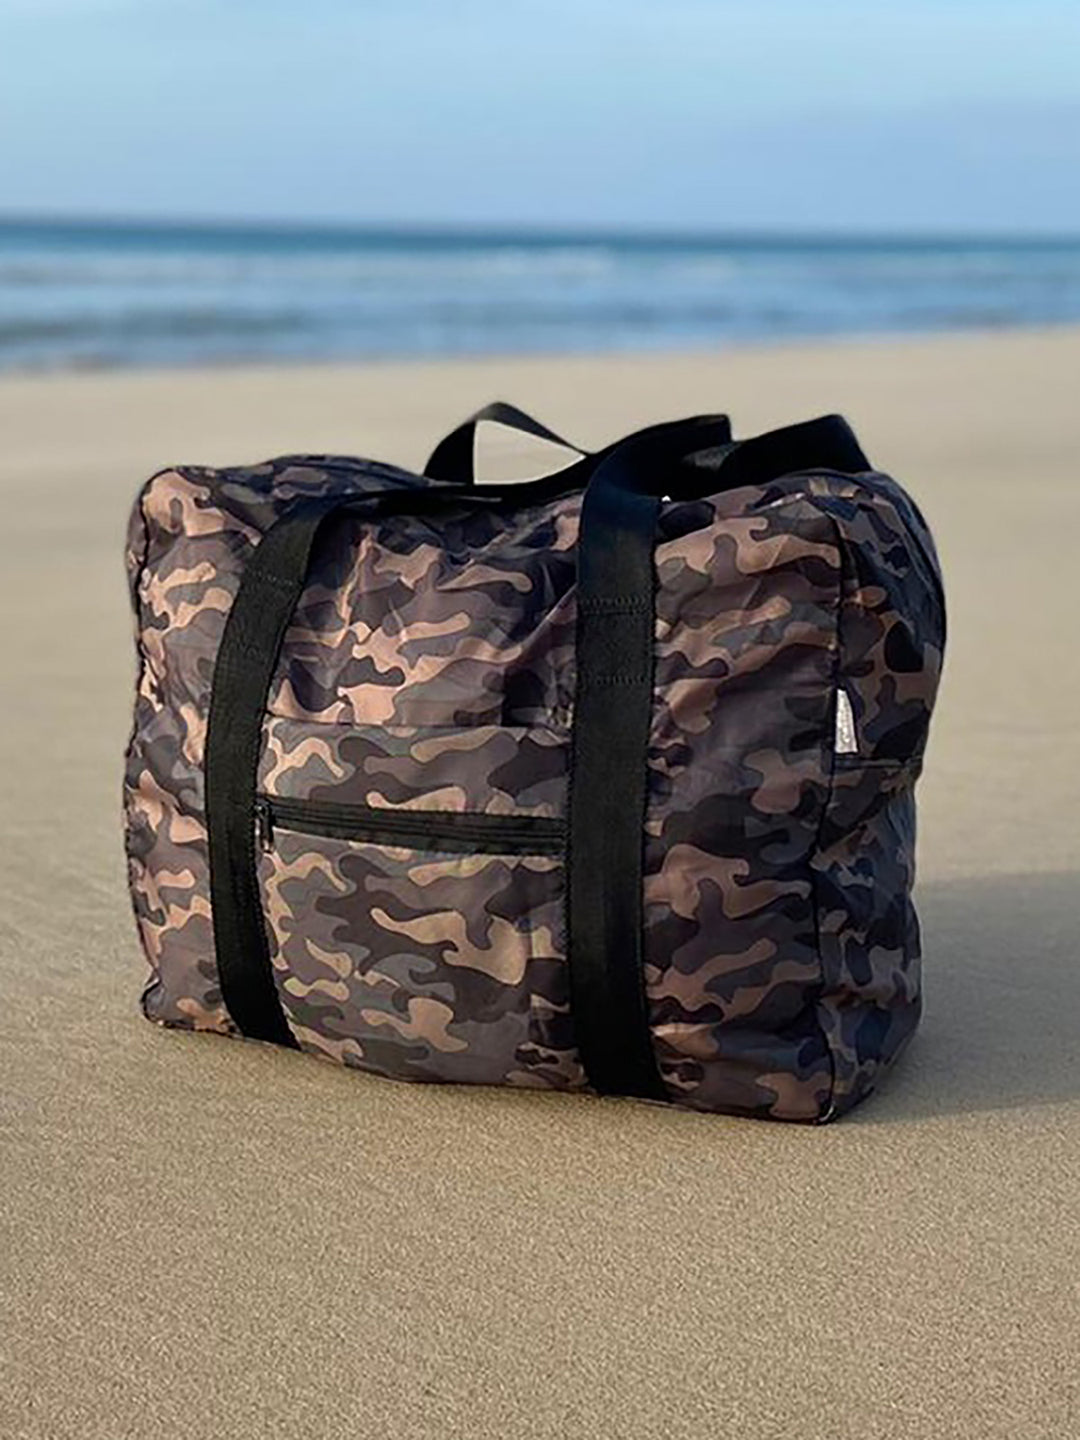 Easy Travel Bag Camouflage